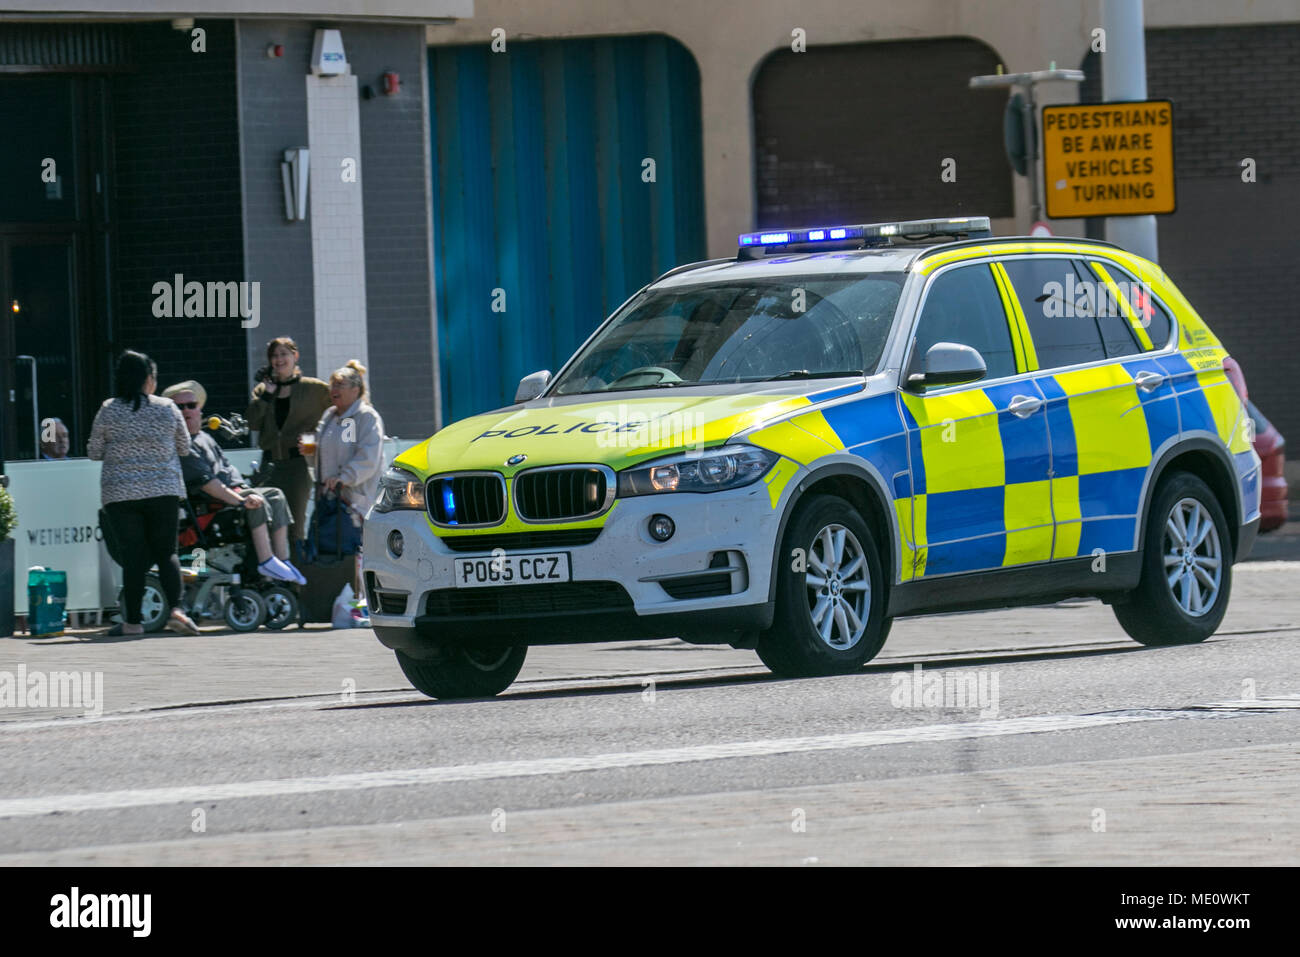 Blackpool police respond to emergency call, on the seafront promenade, UK Stock Photo